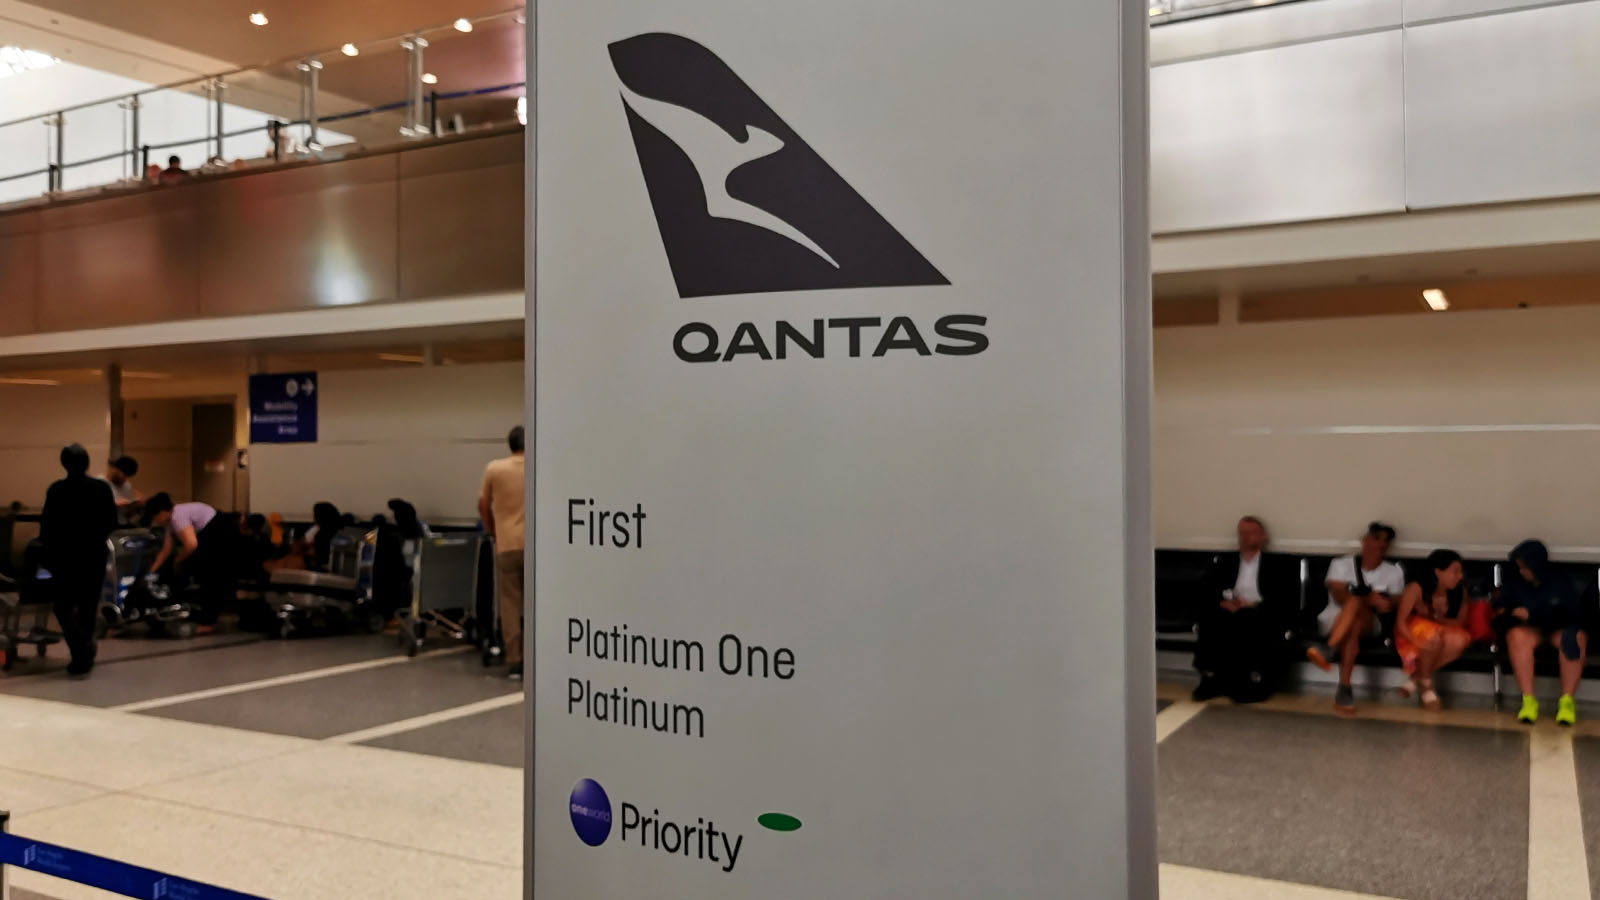 Priority line for Qantas Airbus A380 First